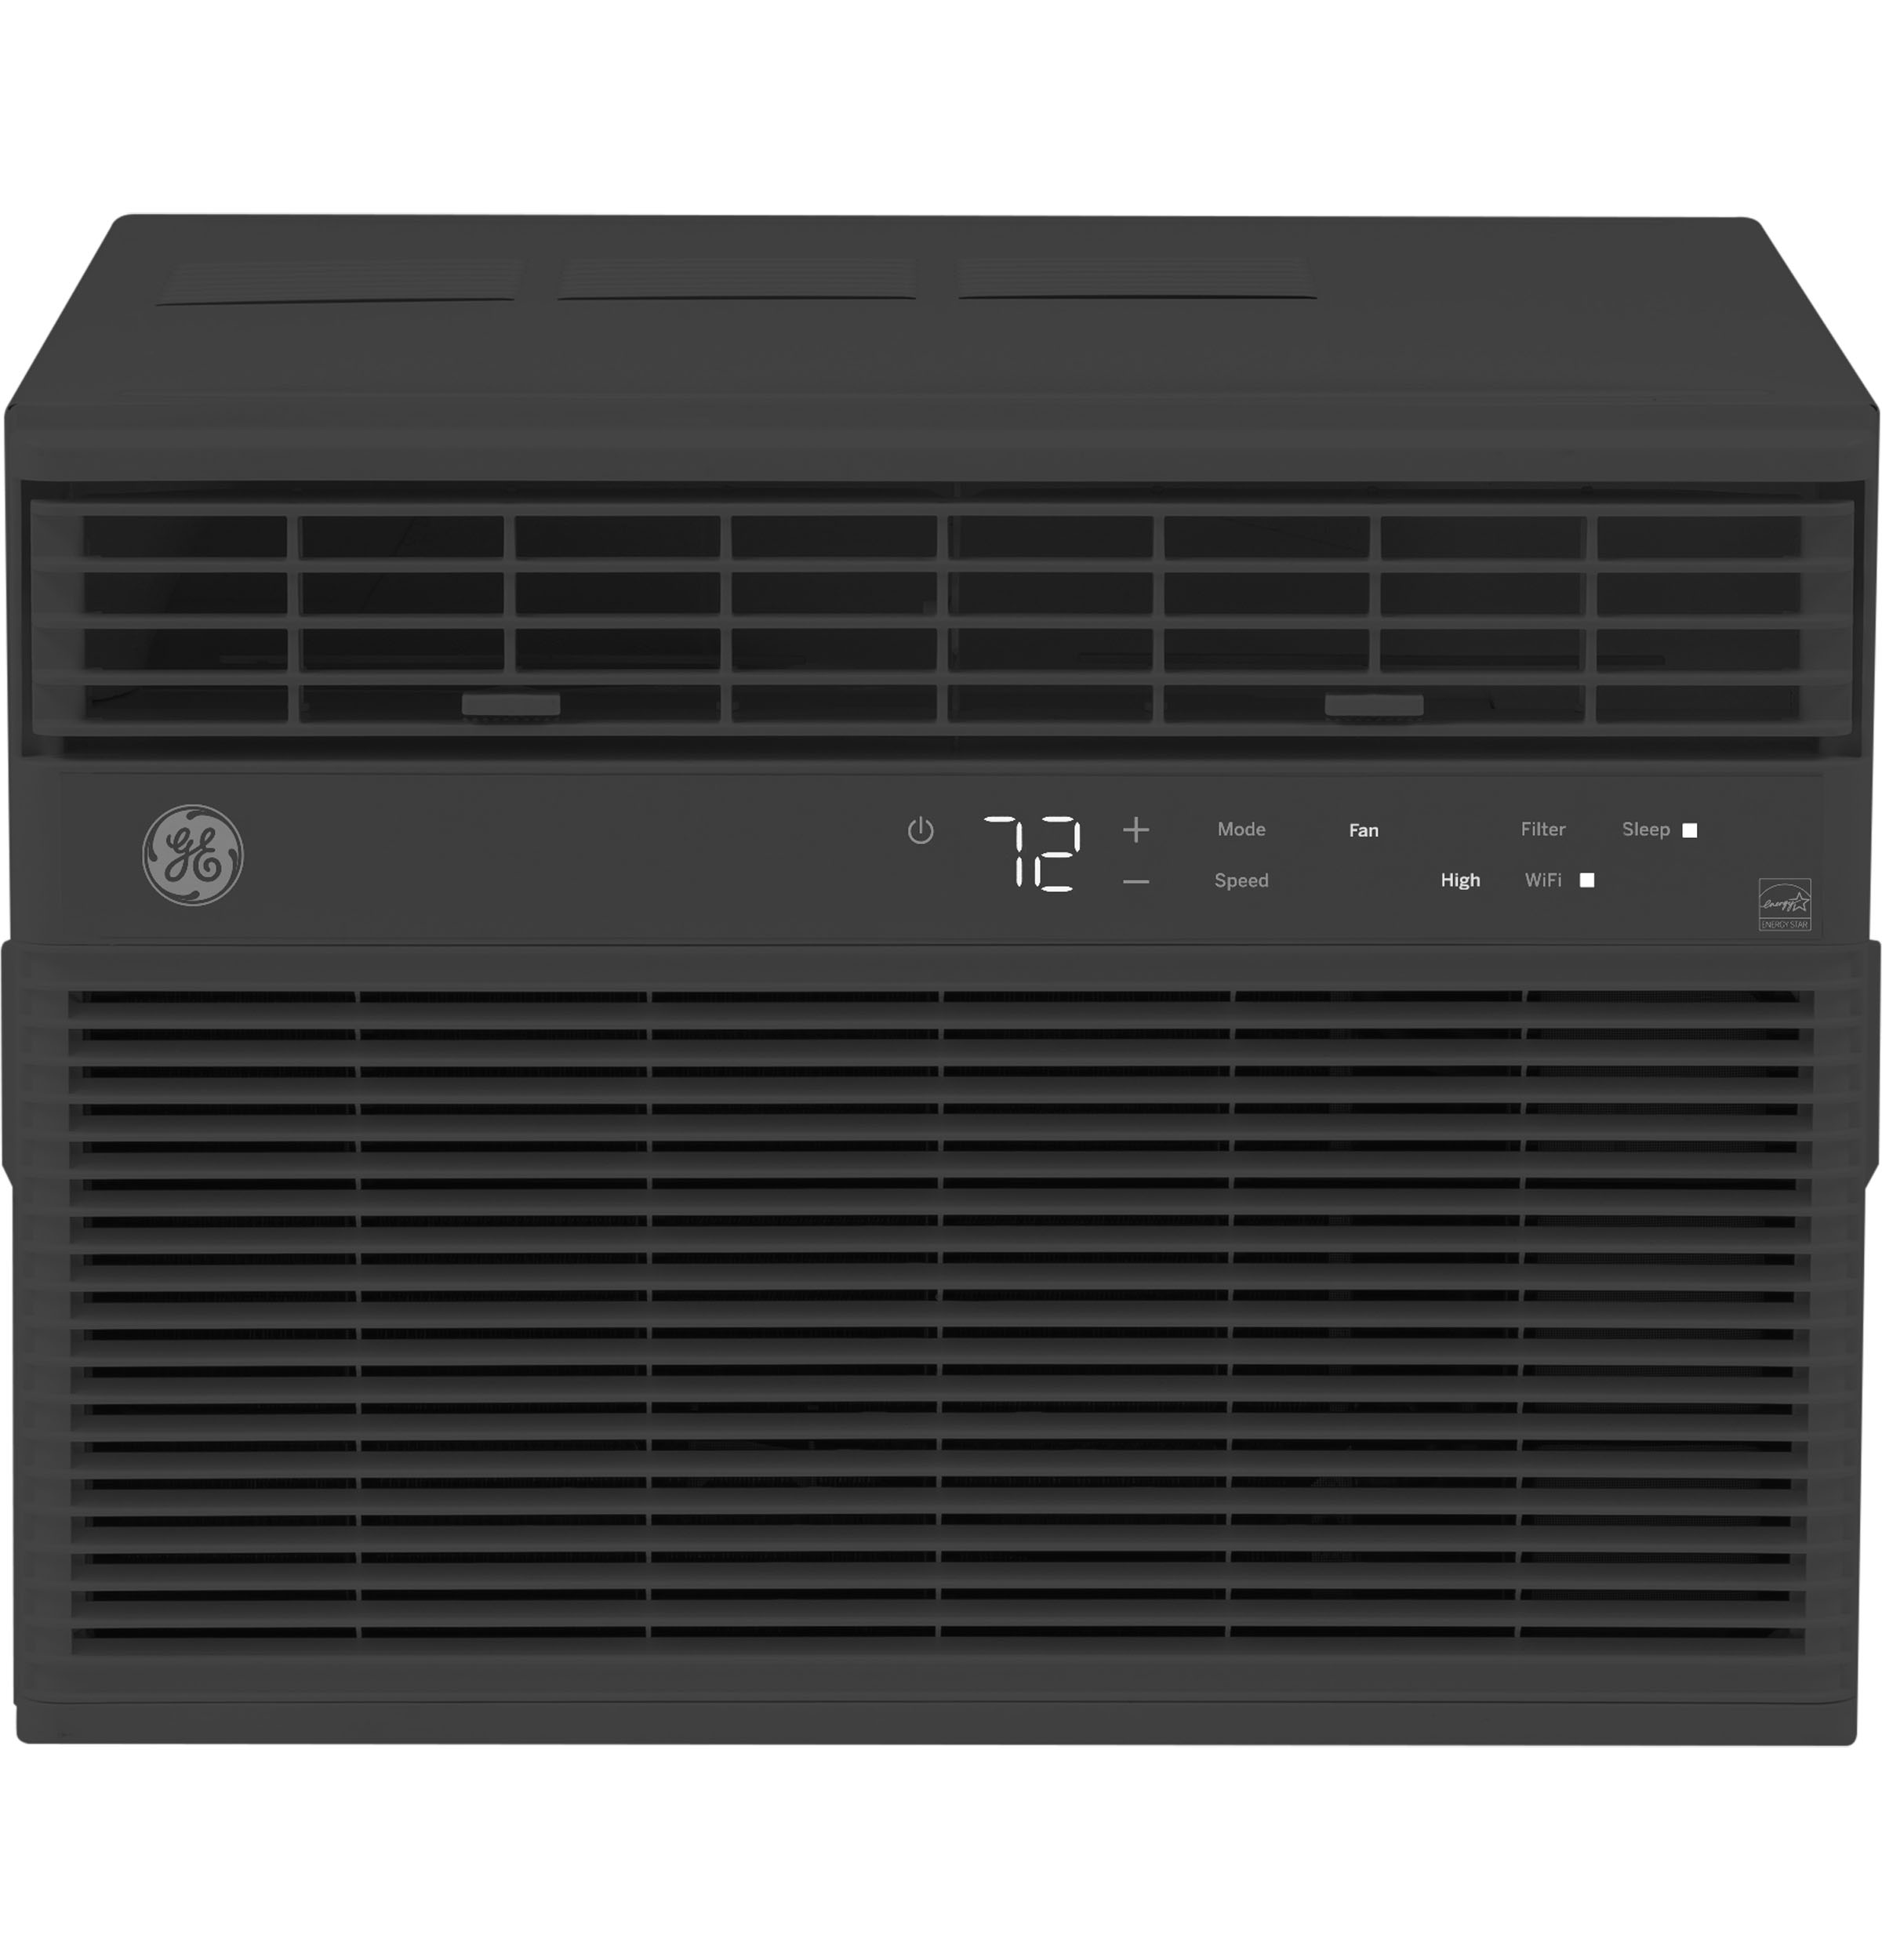 GE® ENERGY STAR® 8,000 BTU Smart Electronic Window Air Conditioner for Medium Rooms up to 350 sq. ft., Black